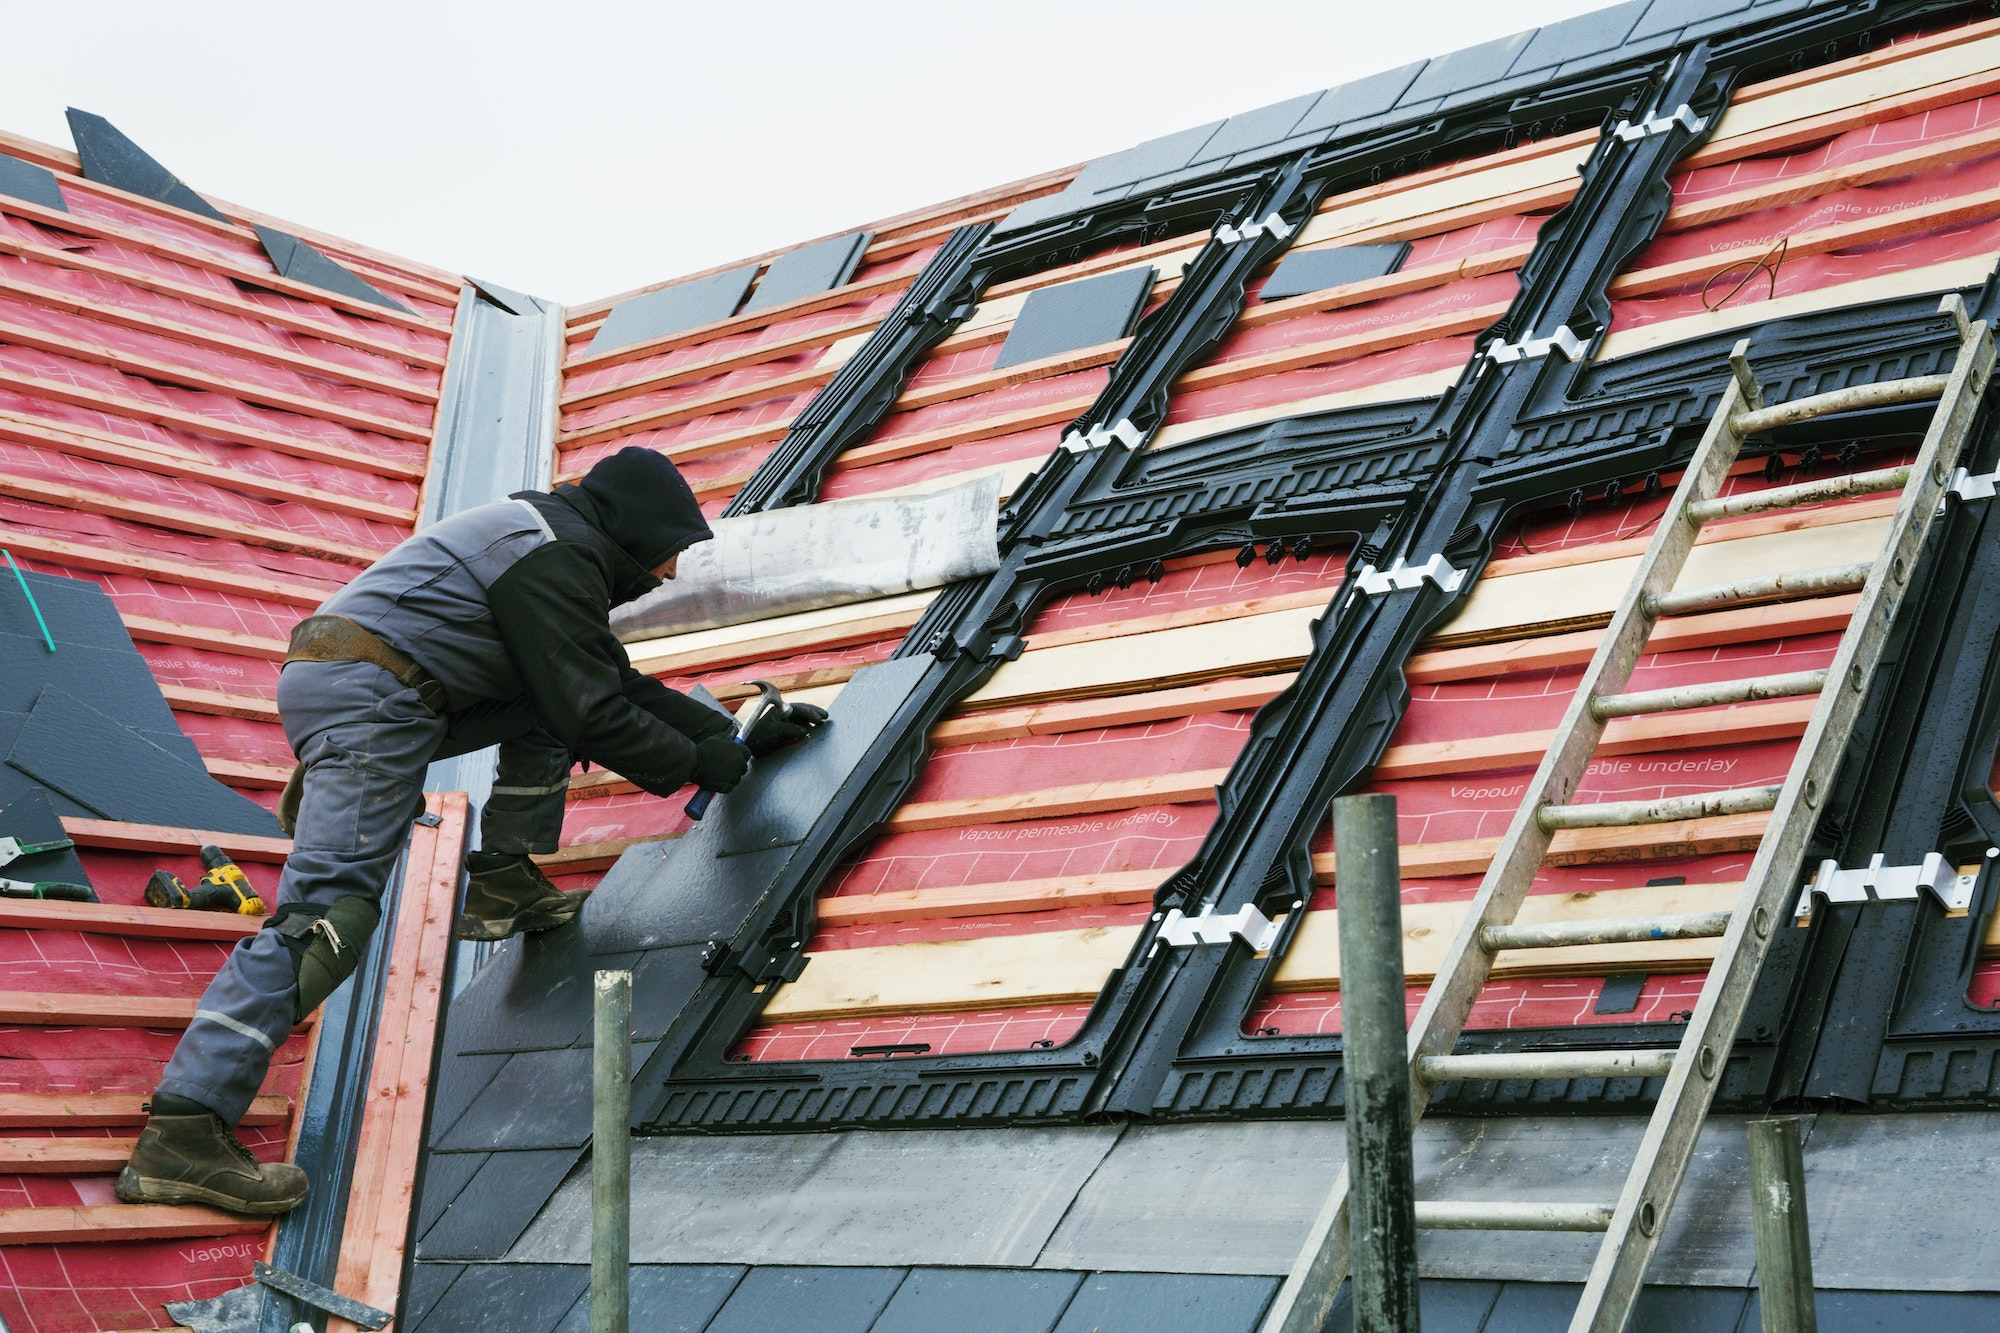 A roofer replacing the tiles on a house roof.